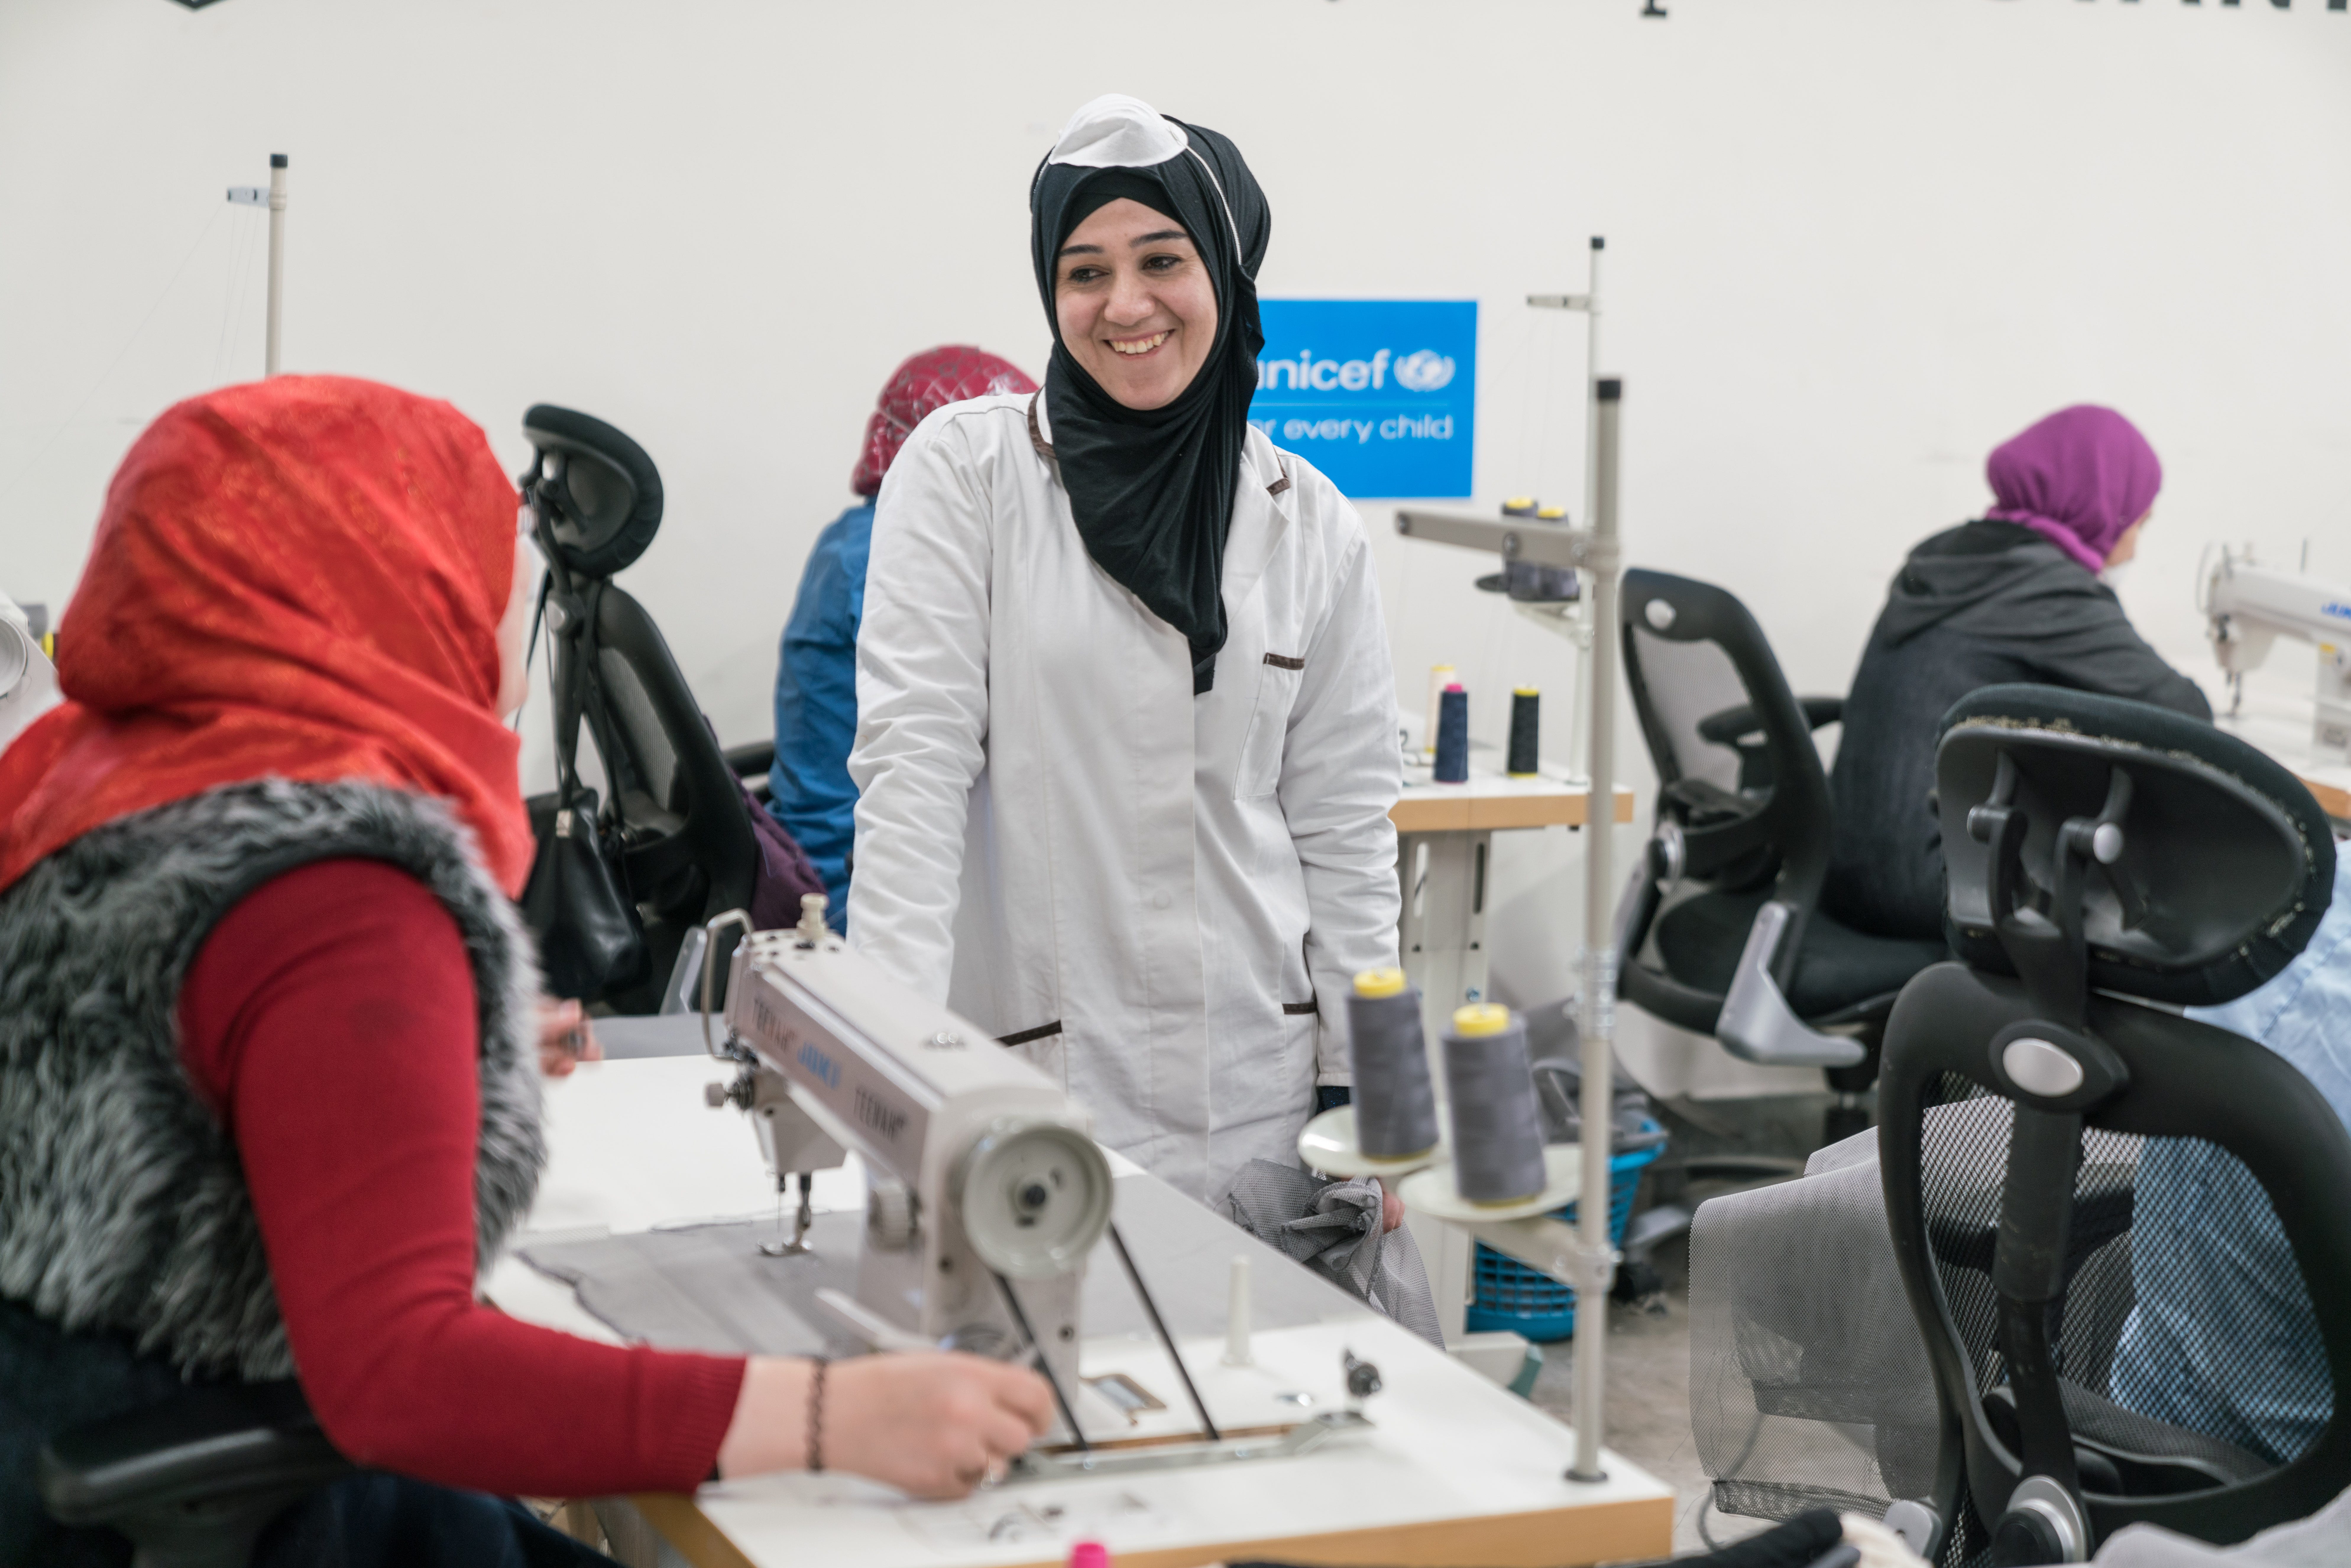 Turning the Youth Employment Crisis into Opportunities to Succeed in Jordan  | by UNICEF Jordan | Medium